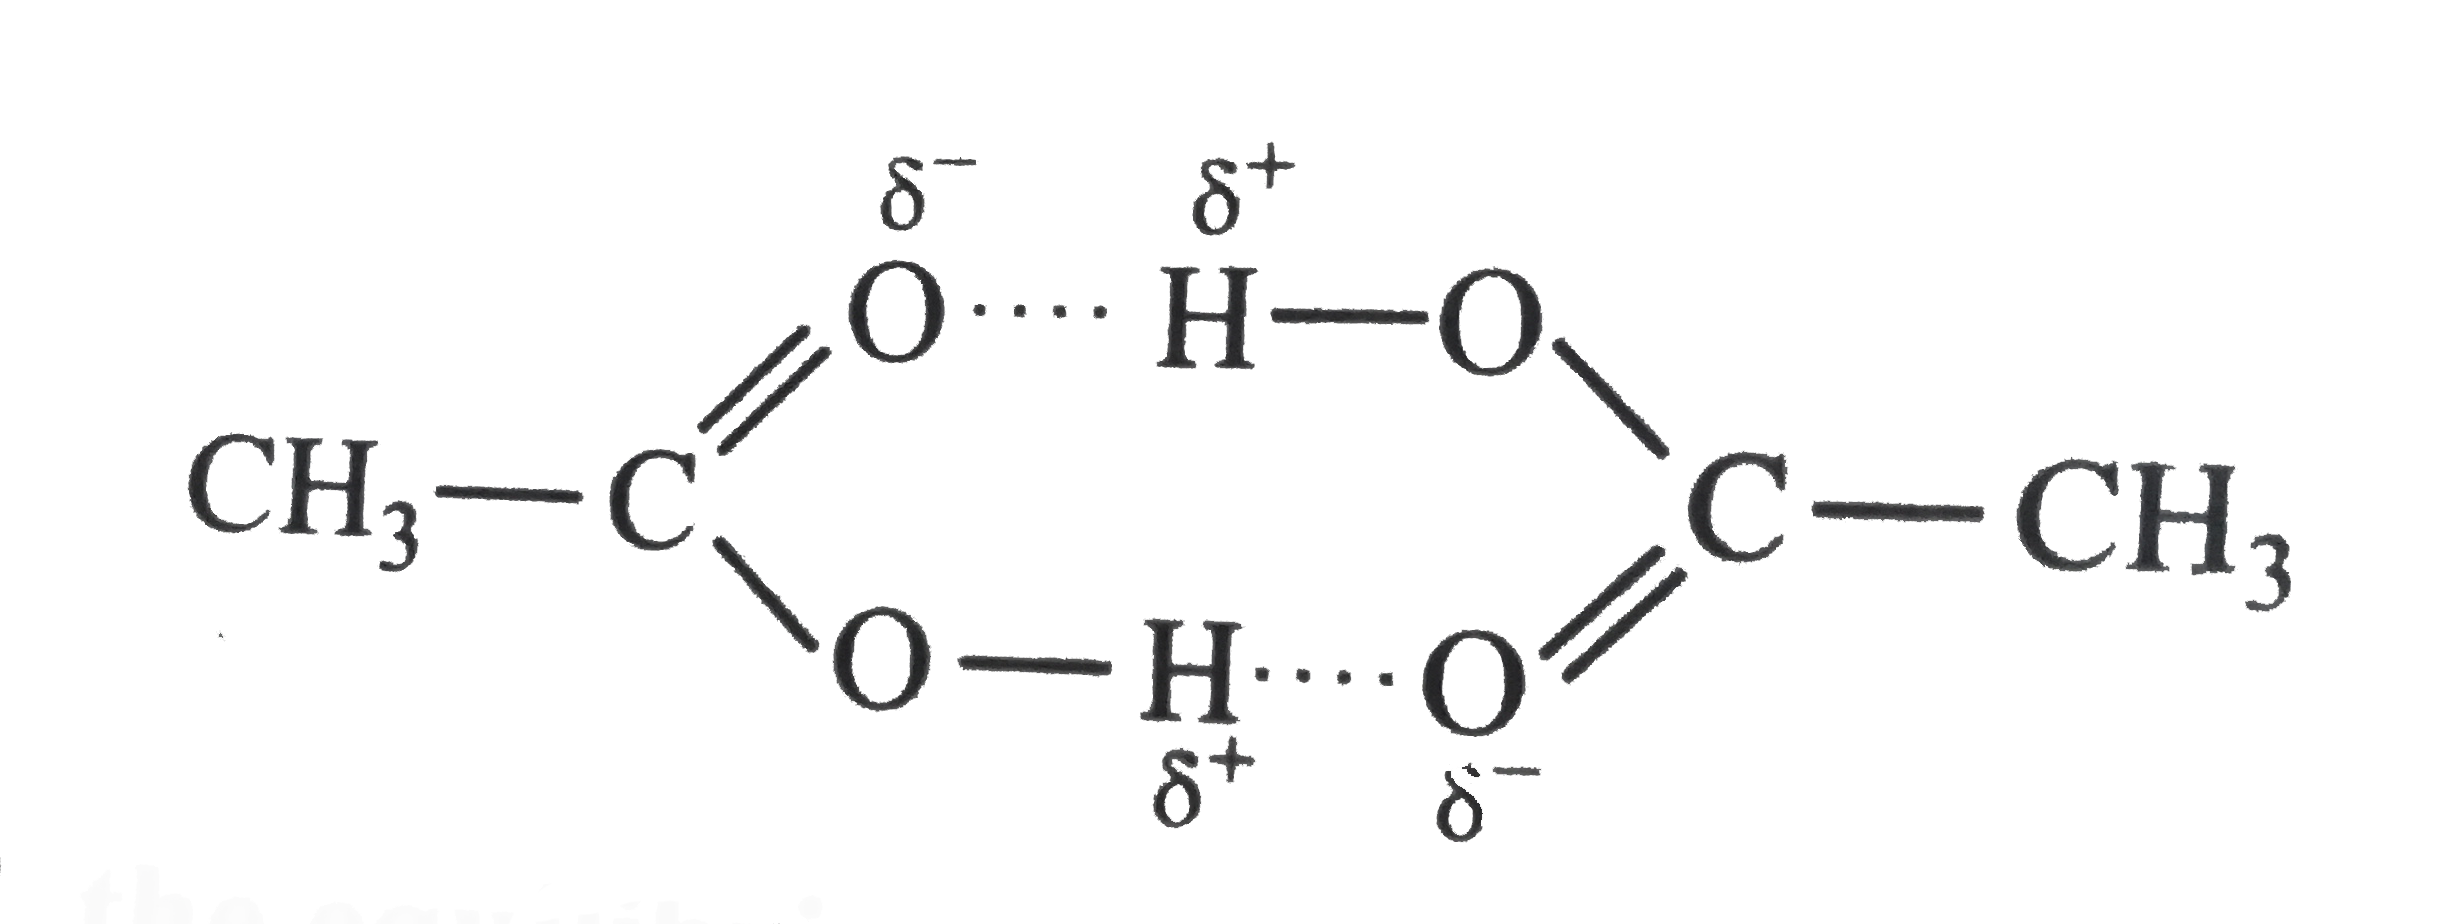 Acetoc acid CH(3)COOH can form a dimer (CH(3)COOH)(2) in the gas phase. The dimer is held togther by two H-bonds with a total strength of 60.0 kJ per mole of dimer      If at 25^(@)C, the equilibrium constant for the dimerisation is 1.3 xx 10^(3), calculate DeltaS^(Theta) for the reaction   2CH(3)COOH (g) hArr (CH(3)COOH)(2)(g)